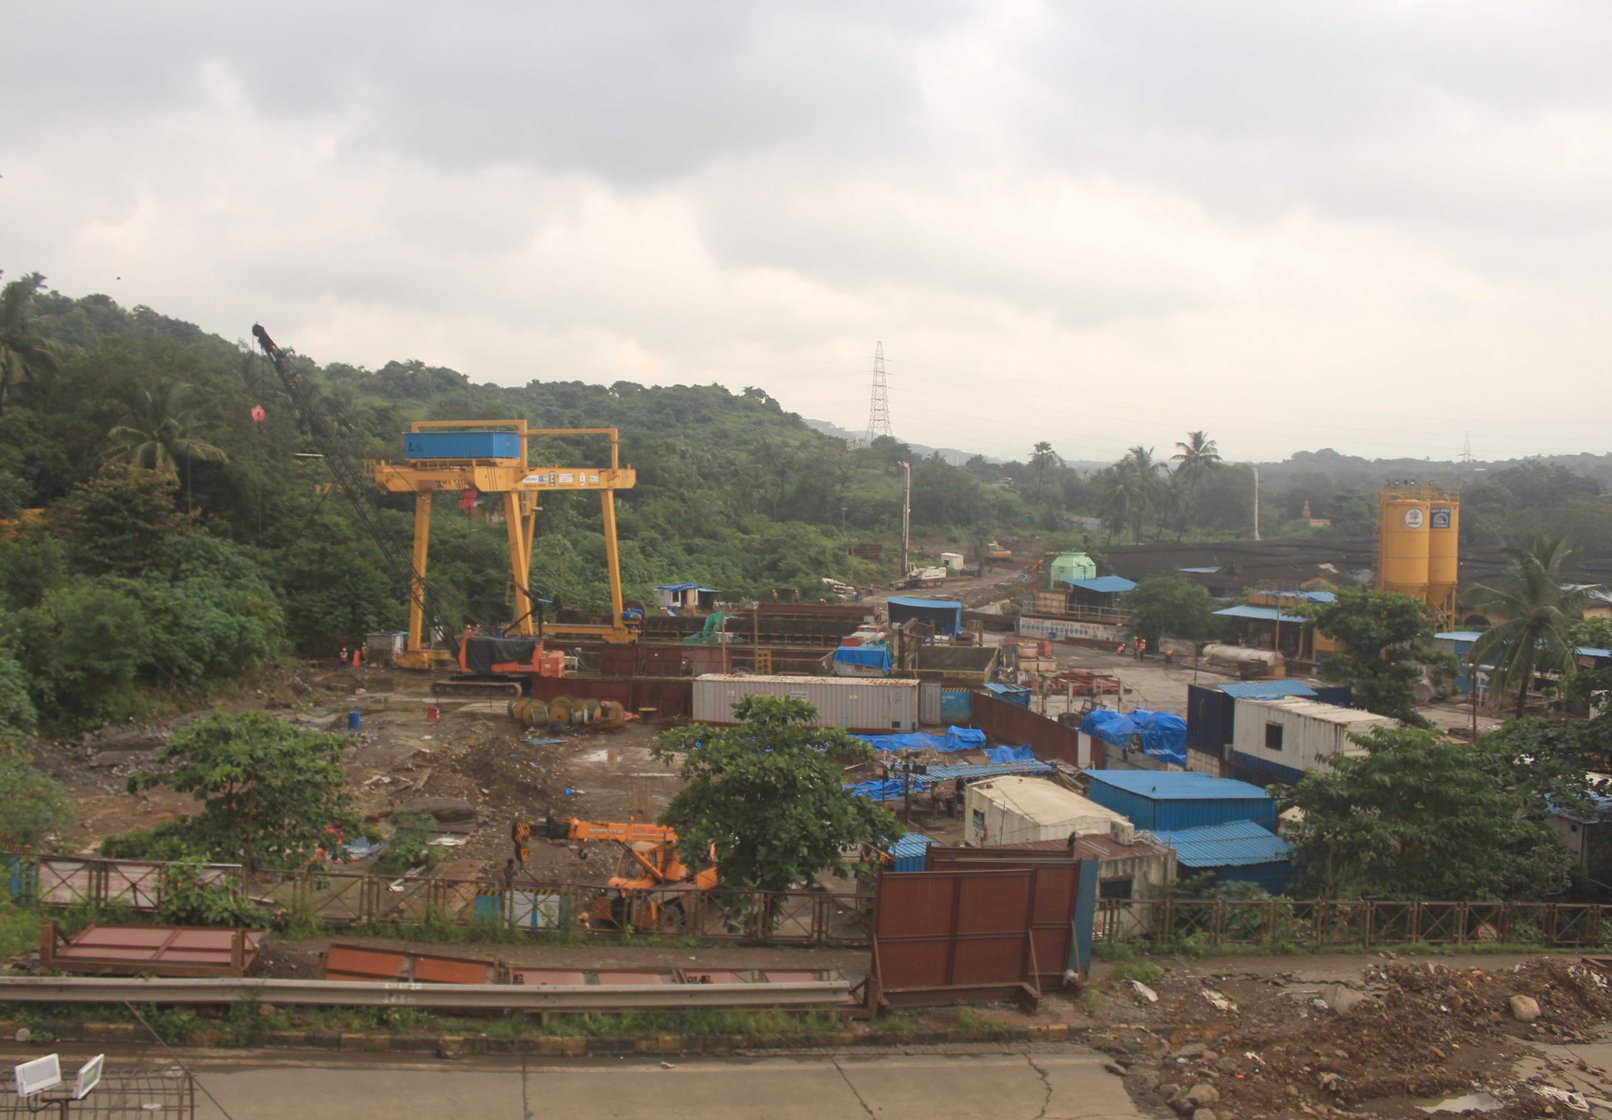 The Mumbai Metro car shed proposes to take over 75 acres of Aarey. This has triggered citizens’ protests and litigation